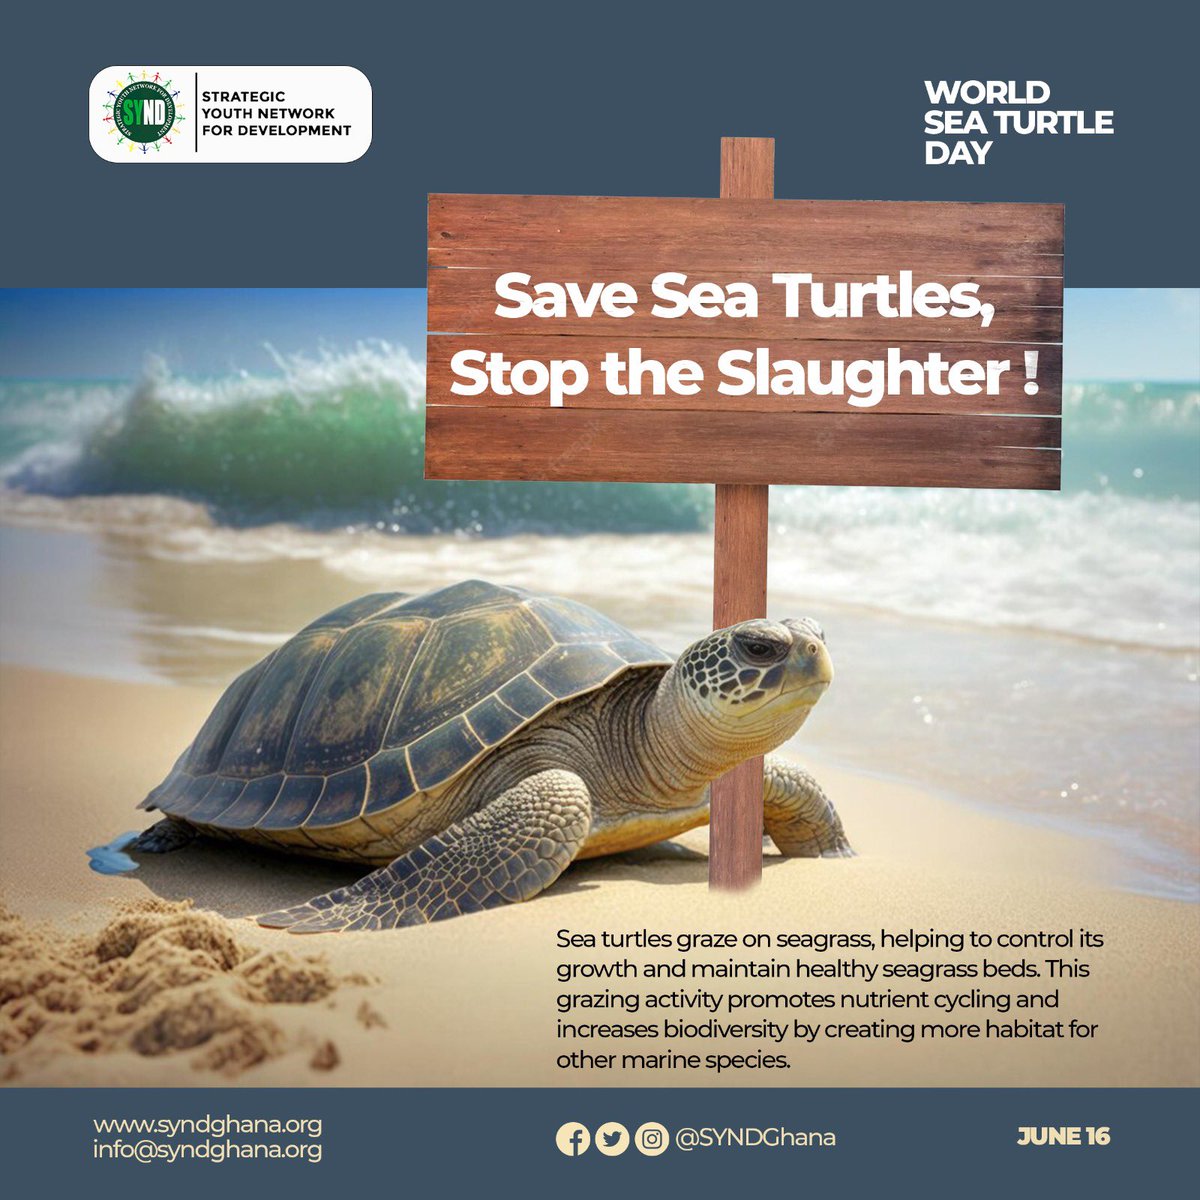 Today marks #WorldSeaTurtleDay, and it is important to remind ourselves that sea turtles are guardians of our oceans, playing vital roles in maintaining healthy #marineecosystems. They graze on seagrass, control jellyfish populations,  However, their existence is under #threat.